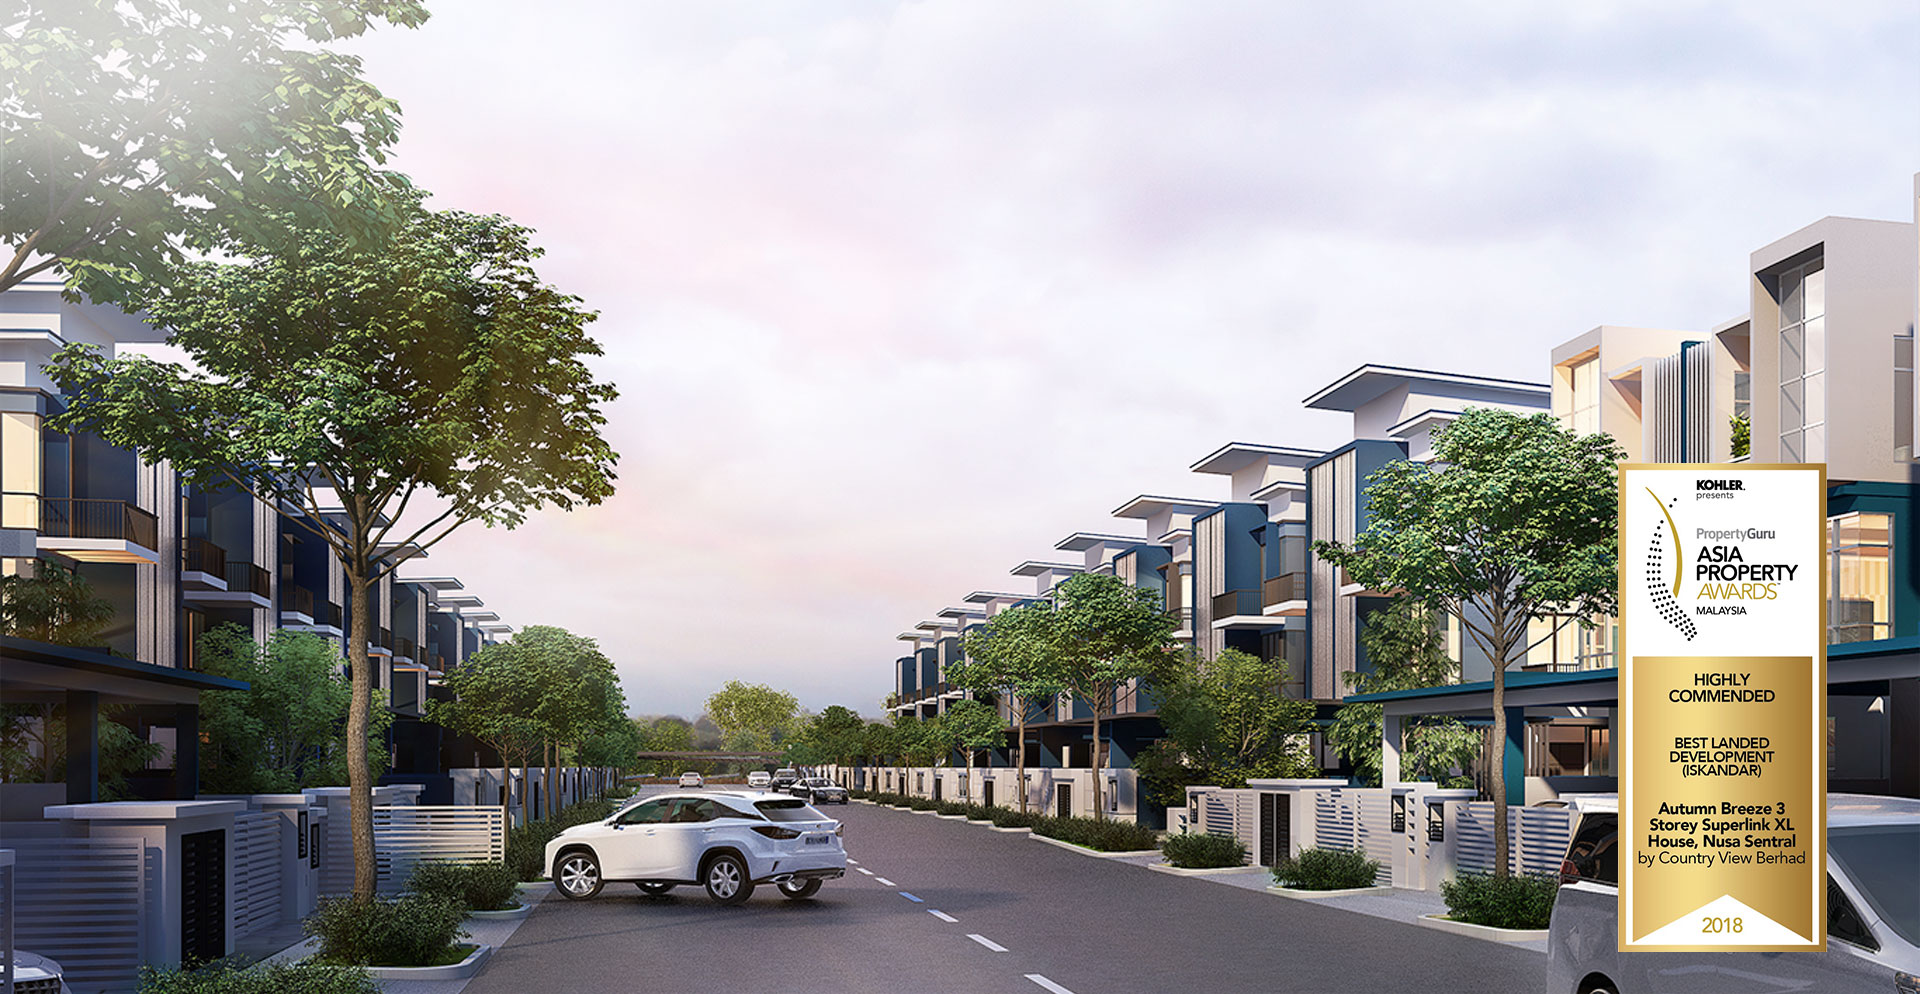 Welcome To Country View Premier Property Developer Johor Bahru Building Homes For Generations Country View Berhad